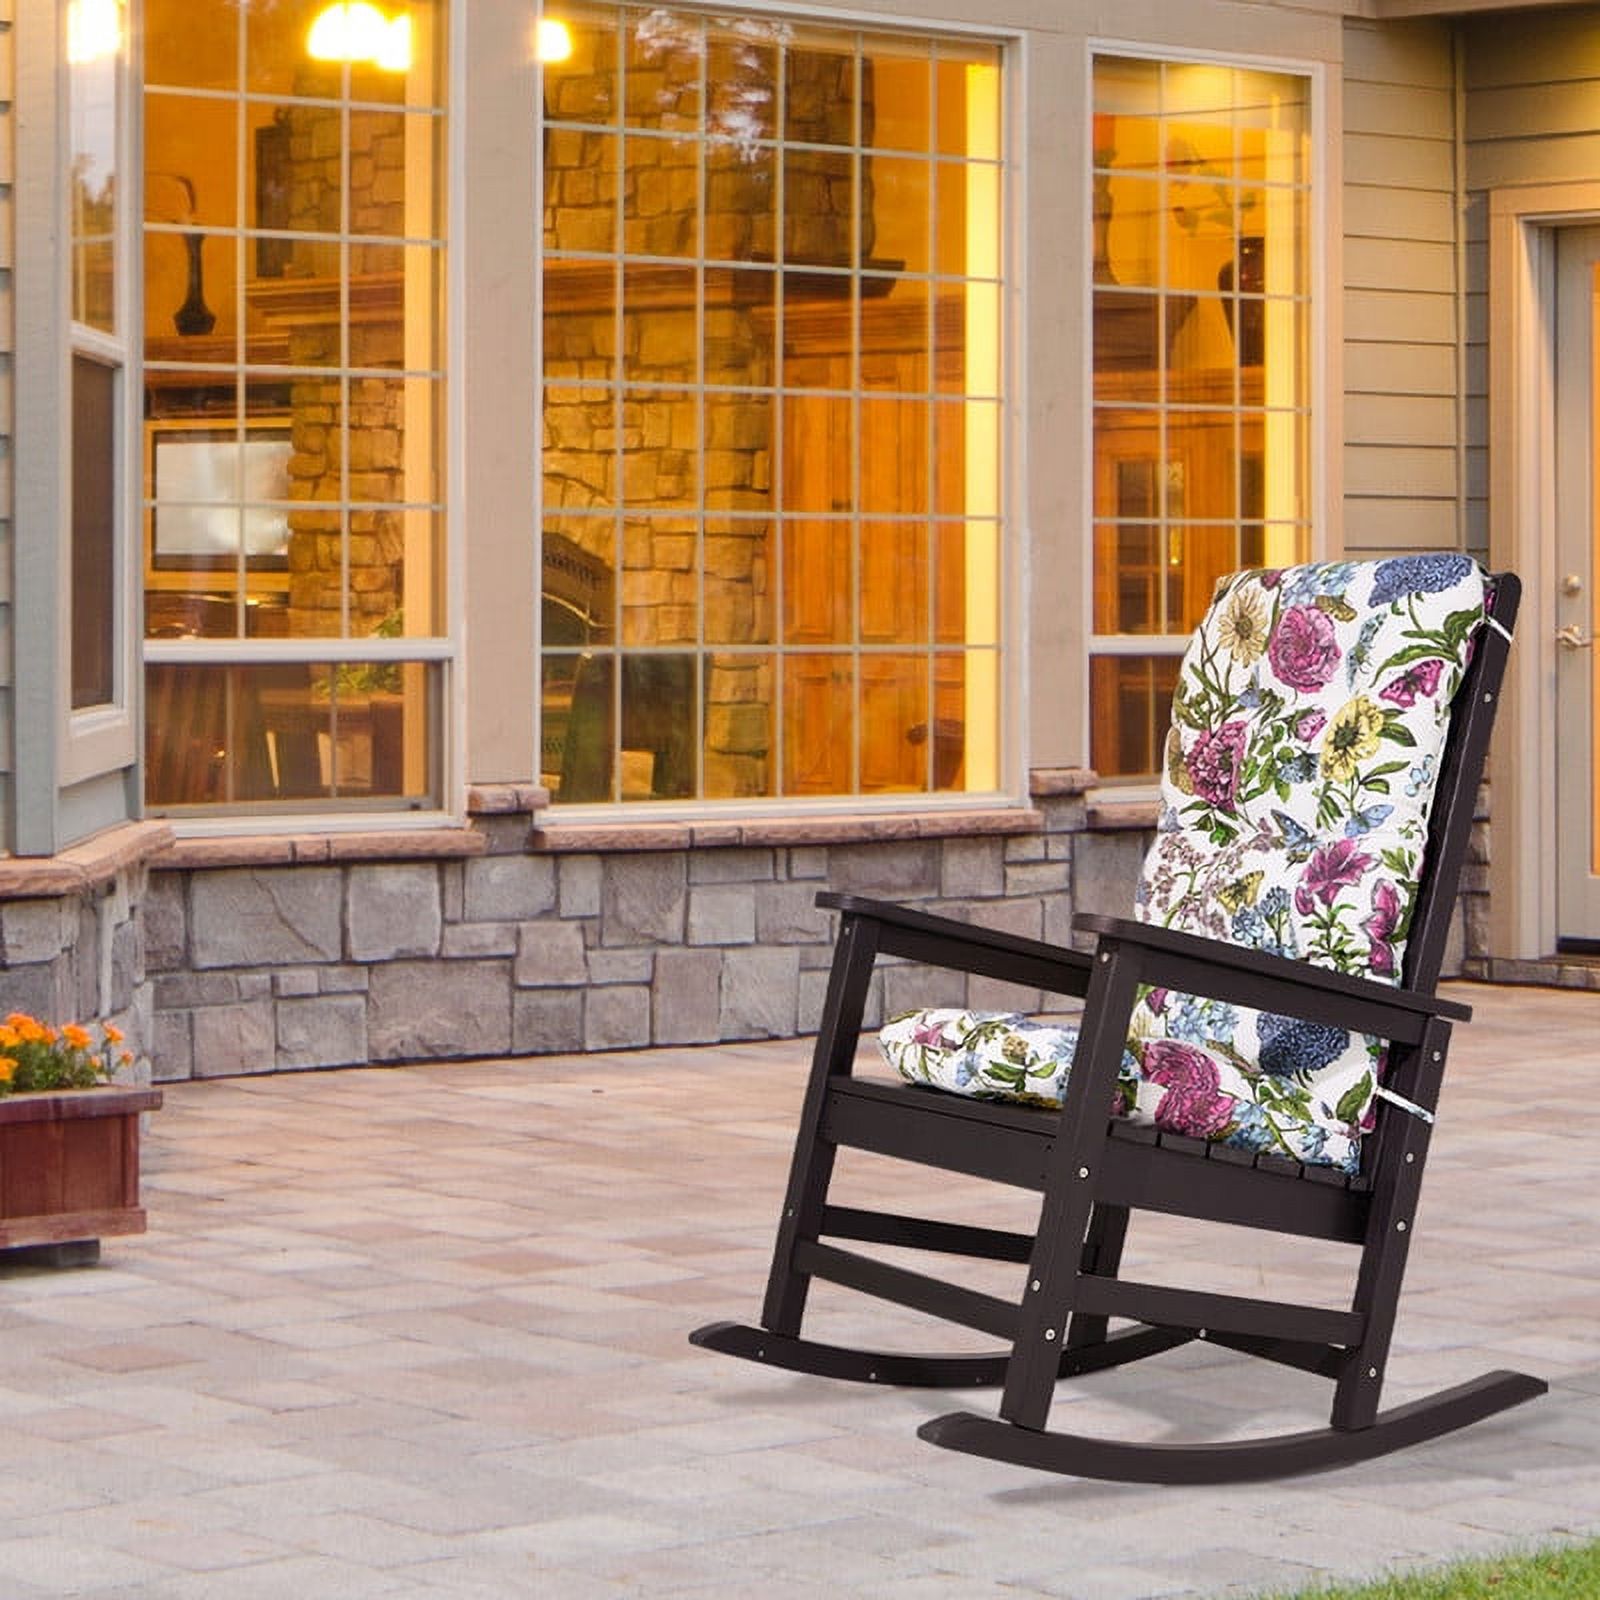 SERWALL Outdoor Rocking Chair Cushion, Foral - image 5 of 6